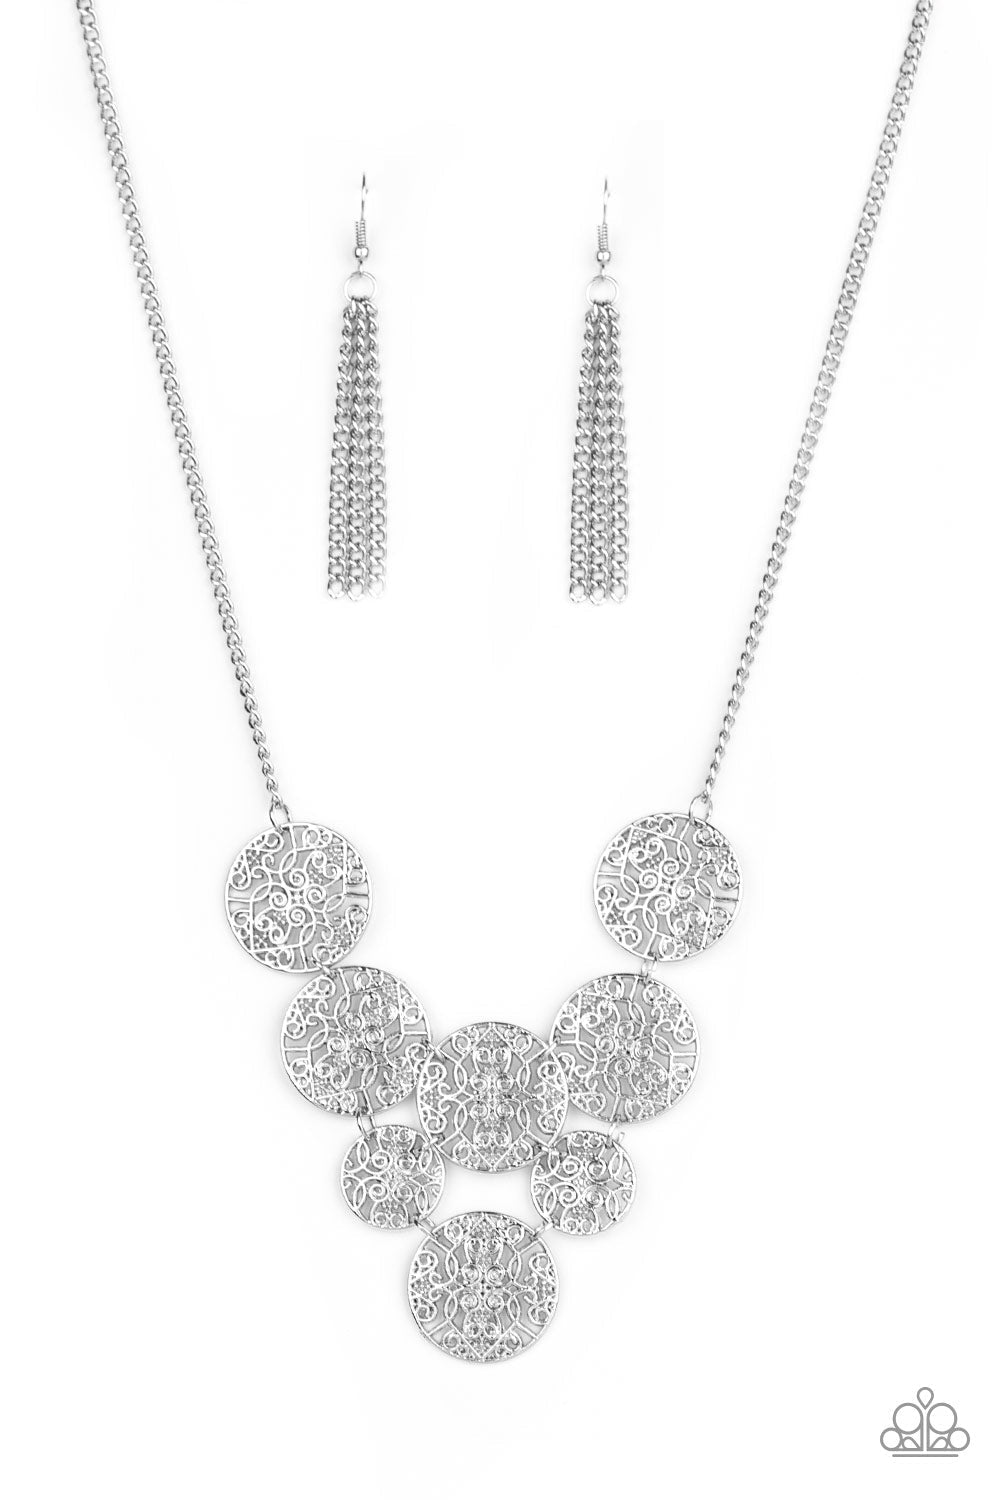 Malibu Idol - Silver Fashion Necklace - Paparazzi Accessories - Shiny mandala-like filigree, a cascade of glistening silver discs link below the collar for a whimsical statement-making fashion. Features an adjustable clasp closure. 